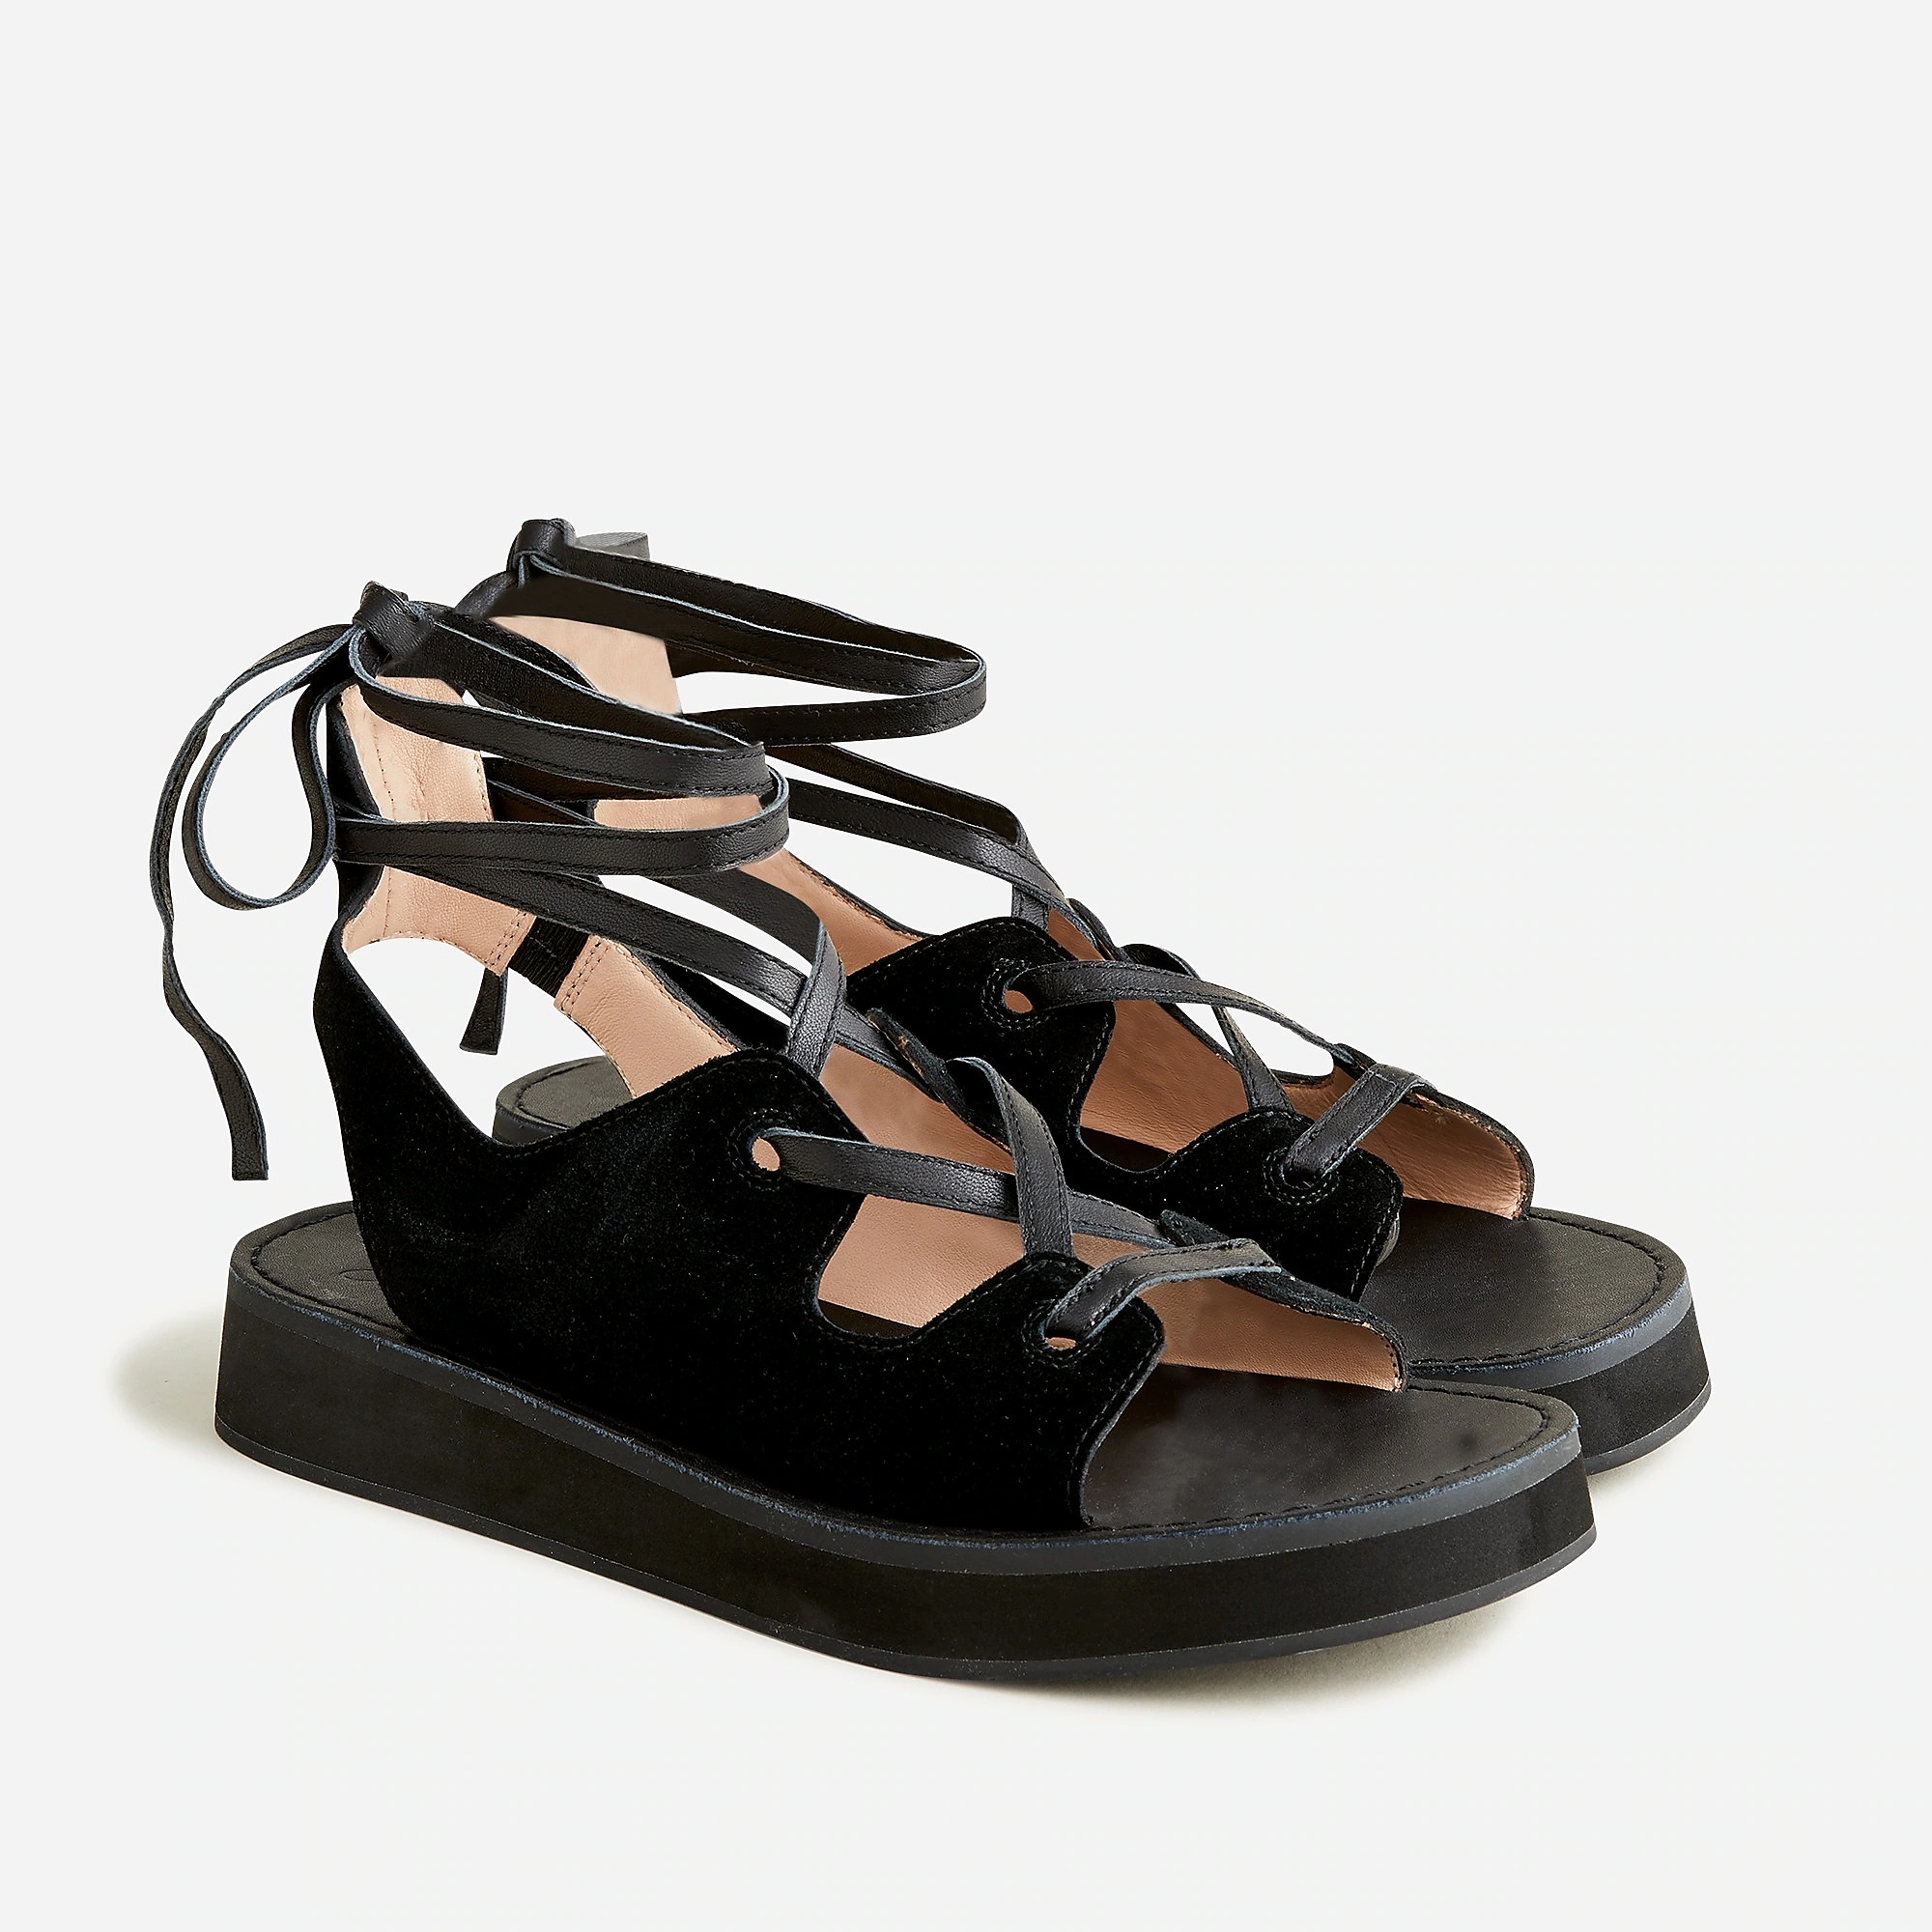 J.Crew Lace-Up Mini Wedge Sandals in Suede